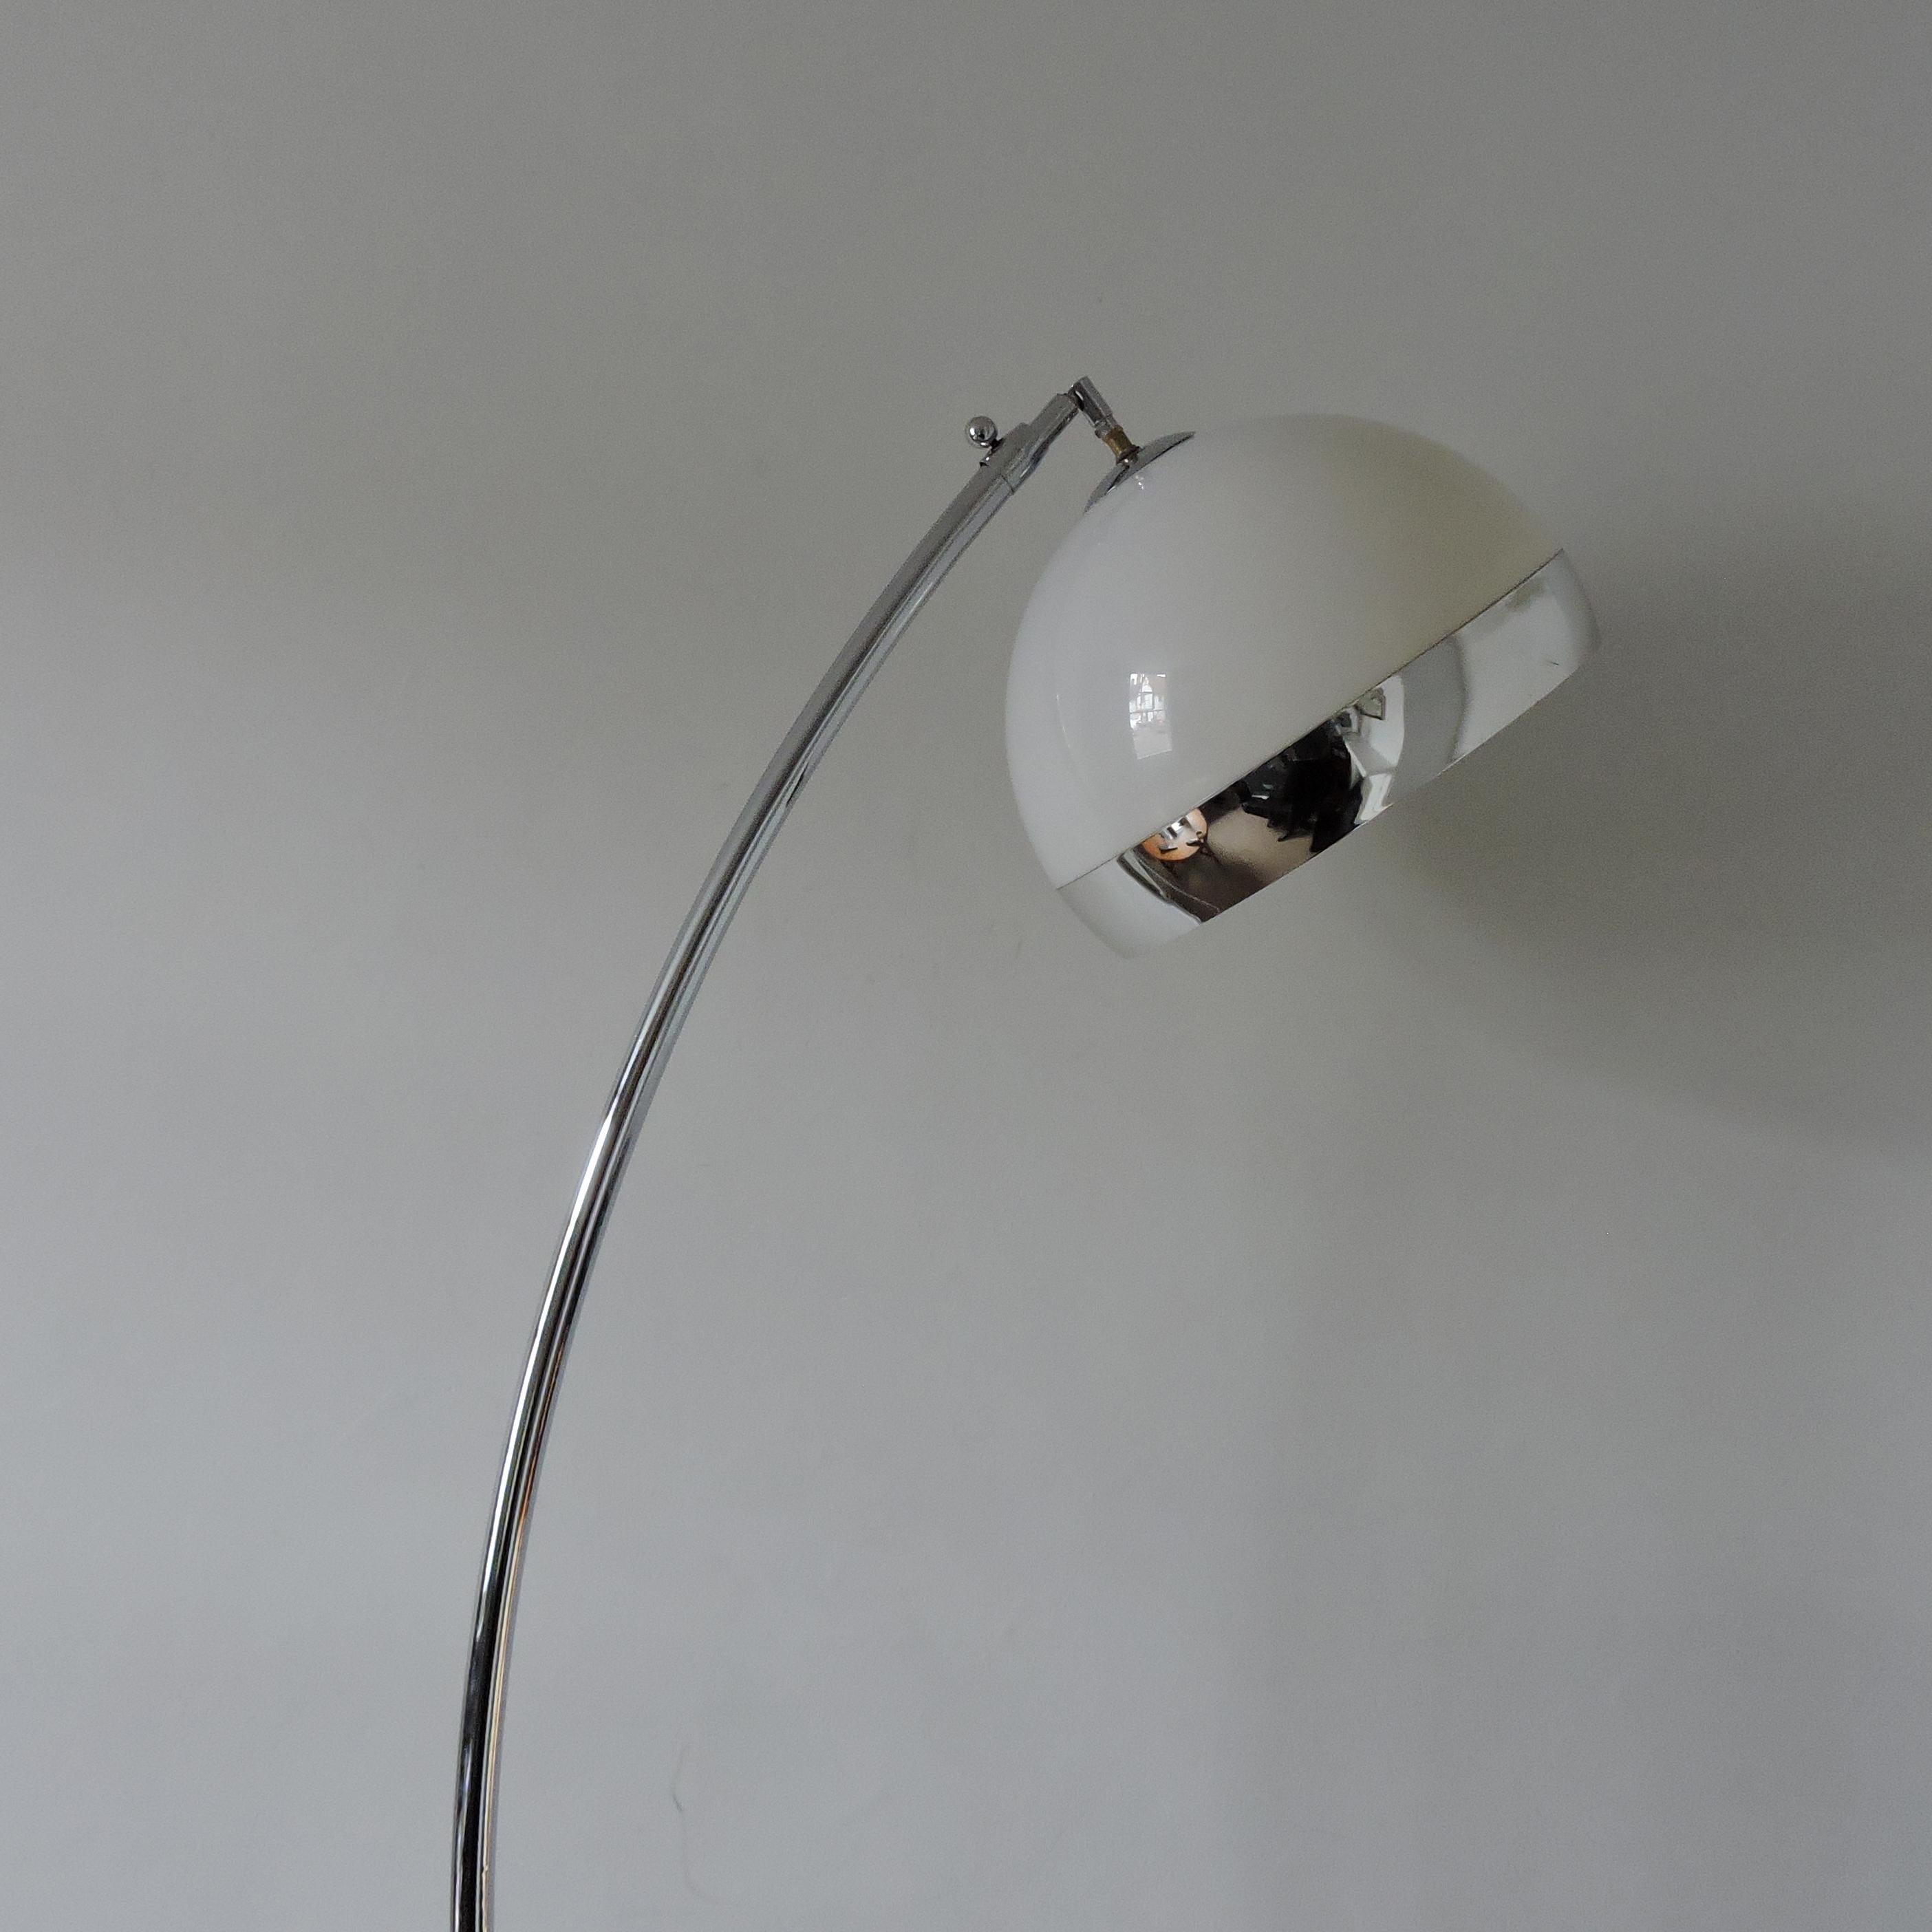 This arc lamp has a marble base, chromed metal rod, and white plastic shade. The base measures 38cm depth 25cm width x 6cm high.